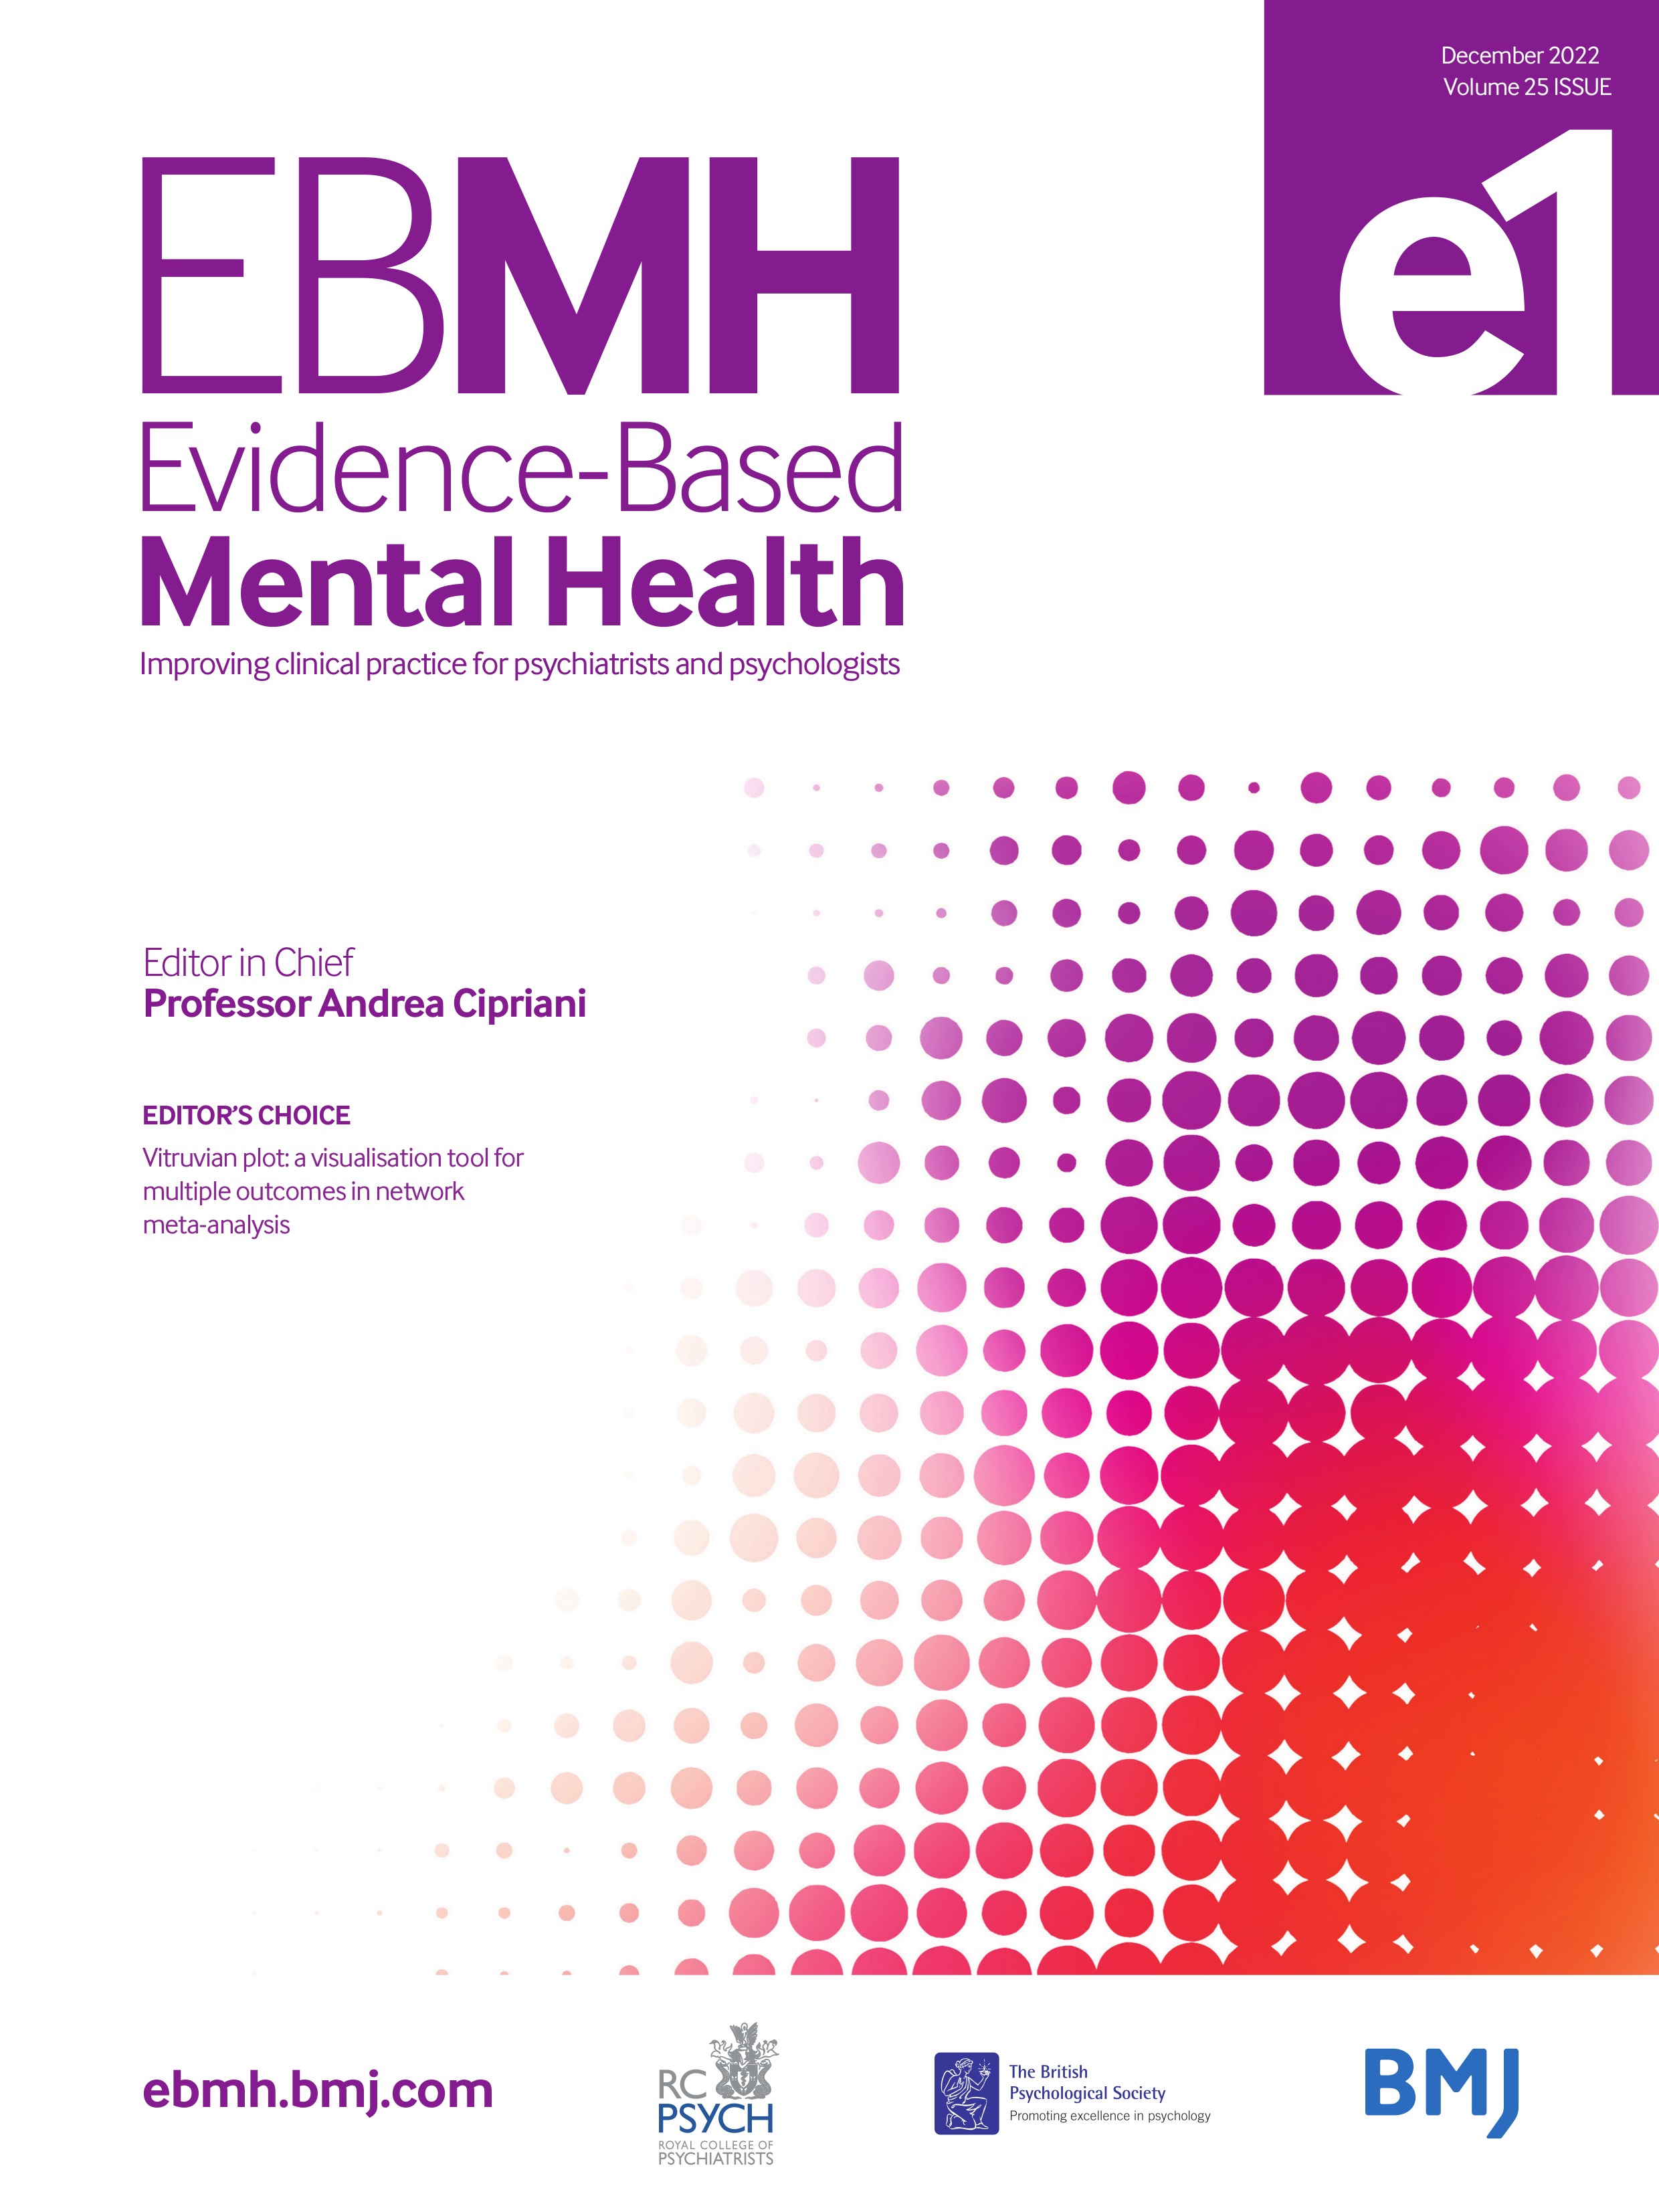 Mental healthcare in primary and community-based settings: evidence beyond the WHO Mental Health Gap Action Programme (mhGAP) Intervention Guide